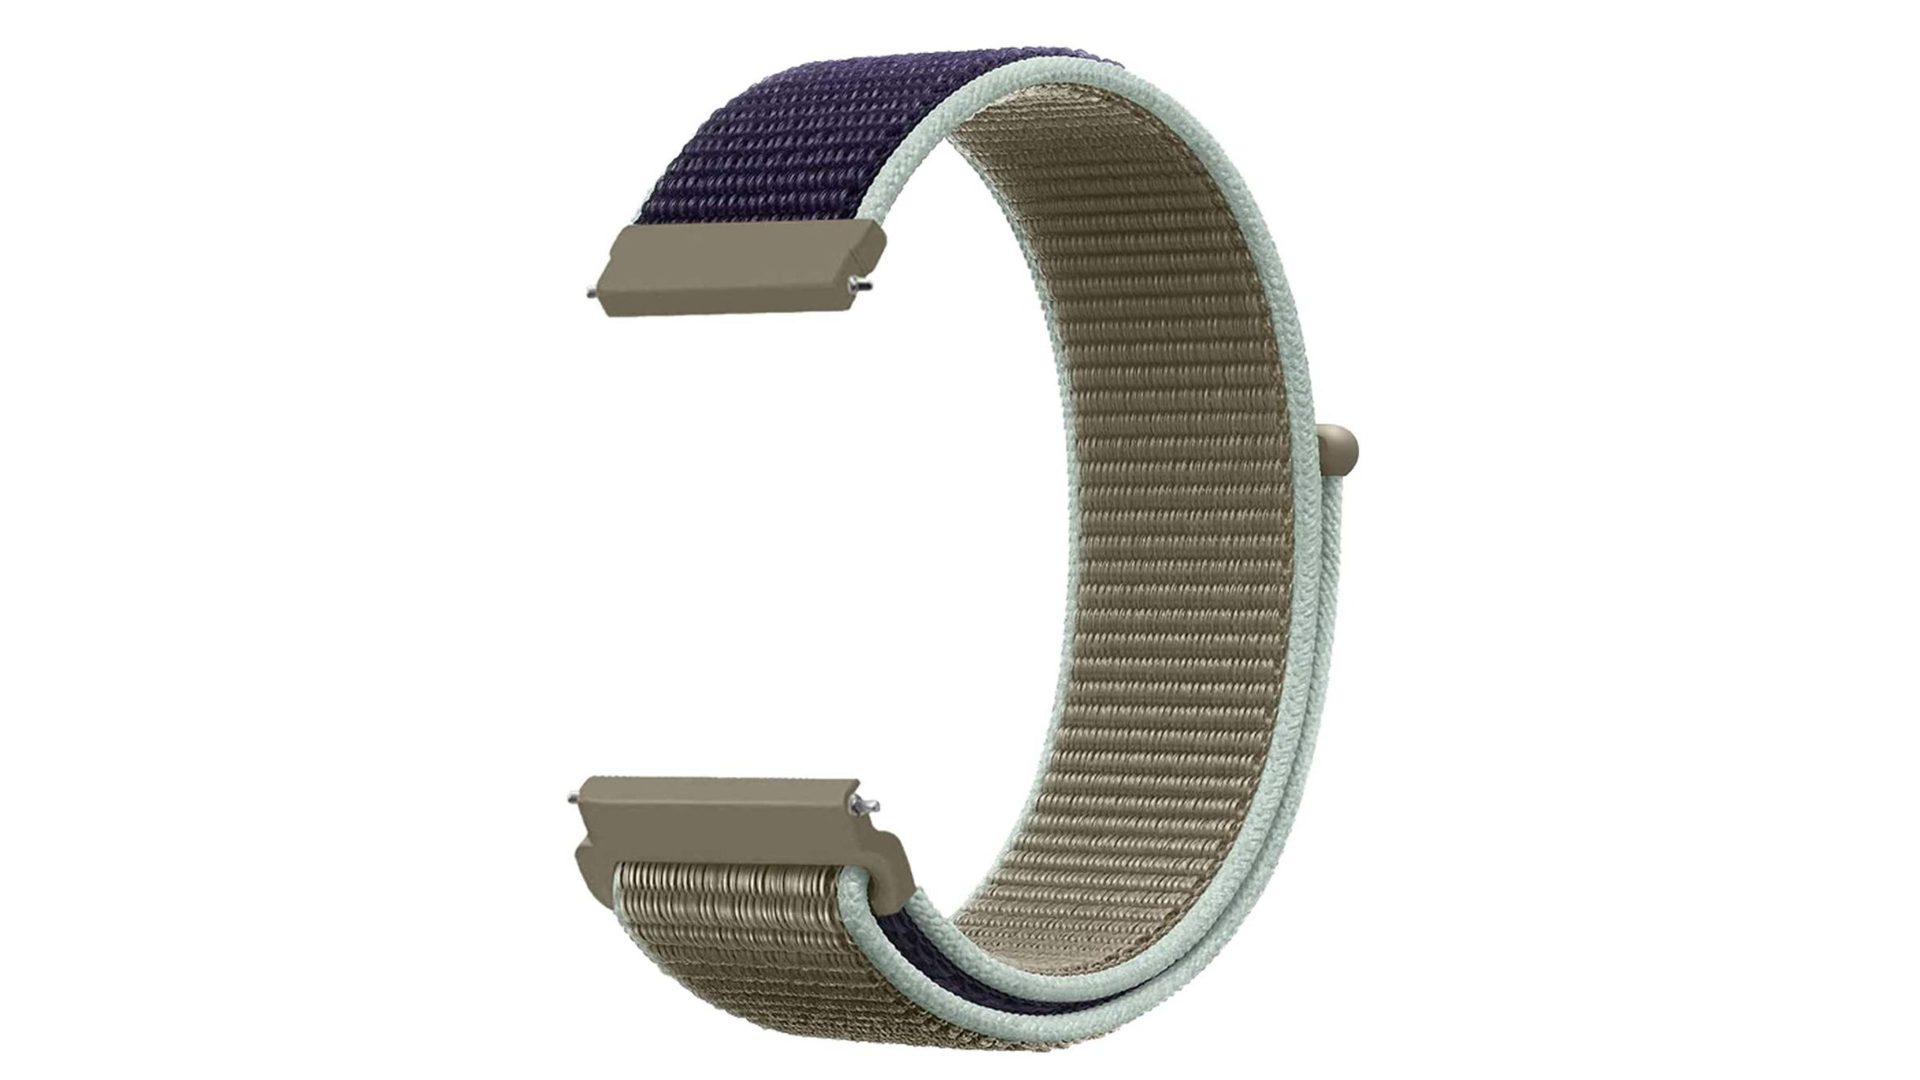 Product image of a Morsey nylon Samsung Galaxy Watch Active 2 replacement band in khaki